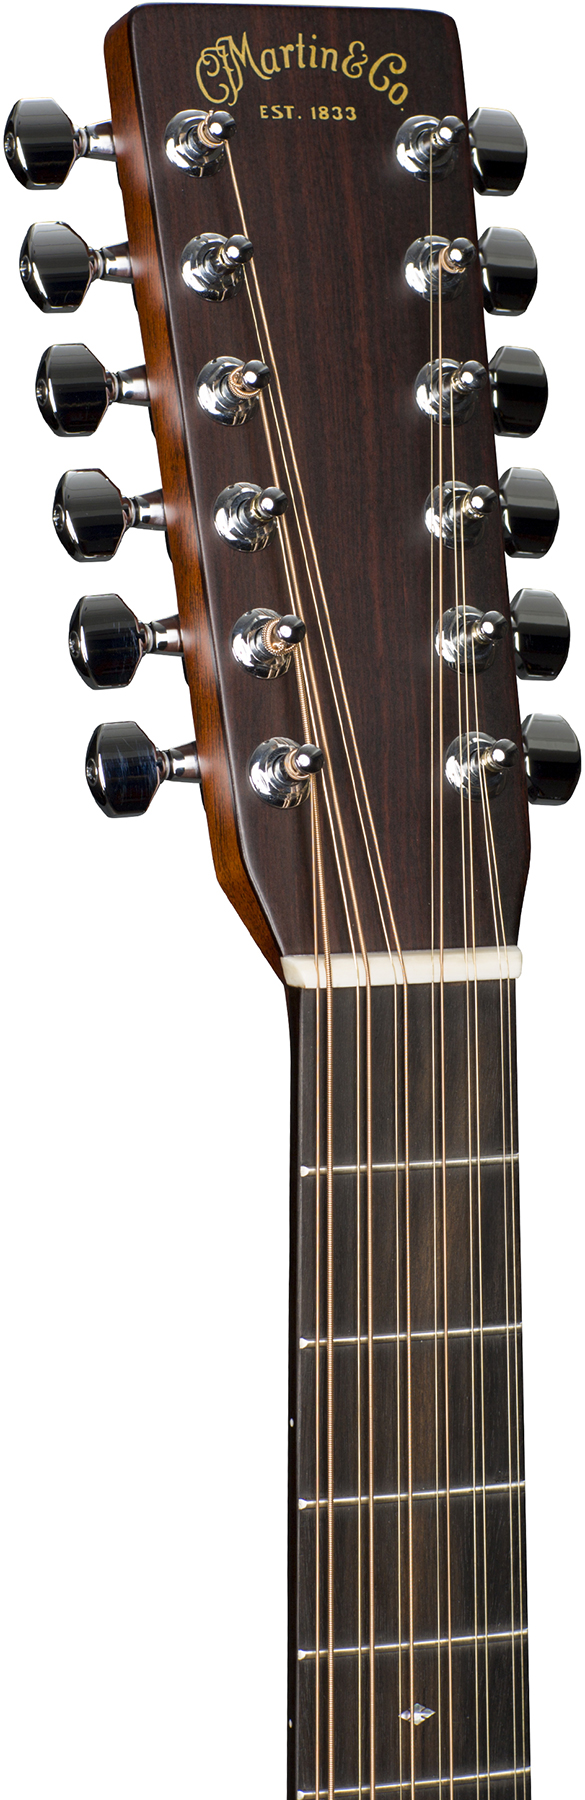 Martin Hd12-28 Standard Re-imagined Dreadnought 12c Epicea Palissandre Eb - Natural Aging Toner - Acoustic guitar & electro - Variation 2